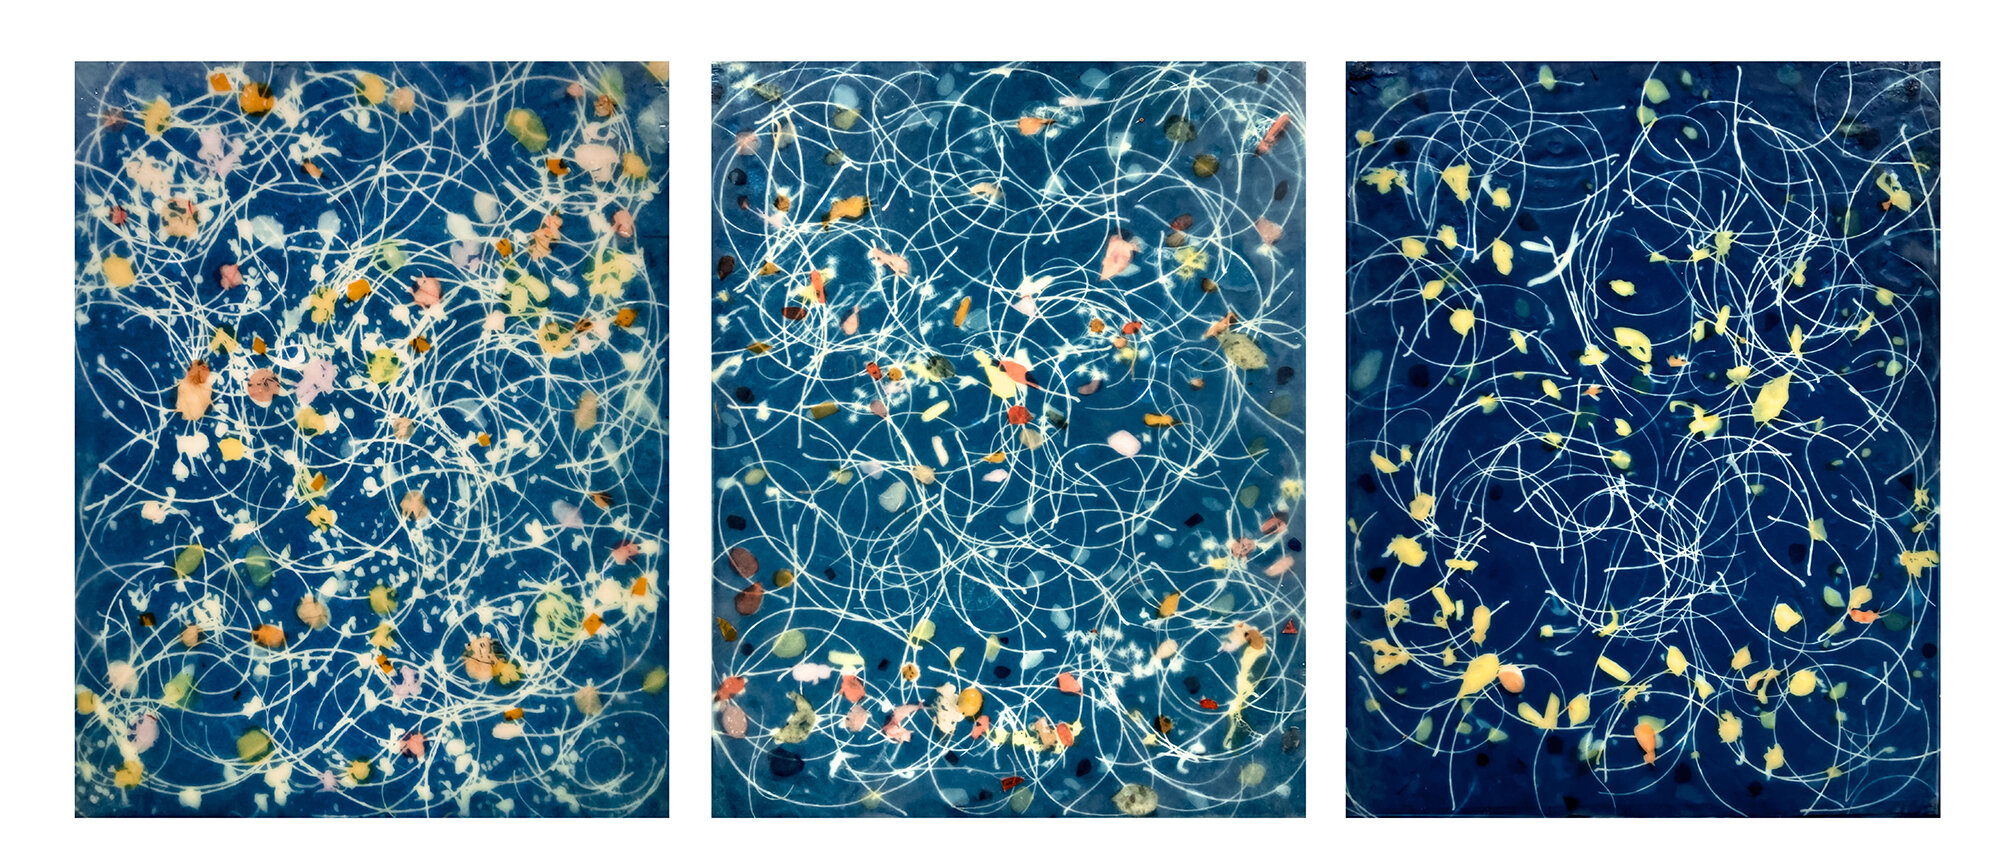   Tobago Tides Triptych , 2020  Cyanotypes on Japanese rice paper, colored Japanese rice papers, wax, encaustic board   3 images 11” x 14" 